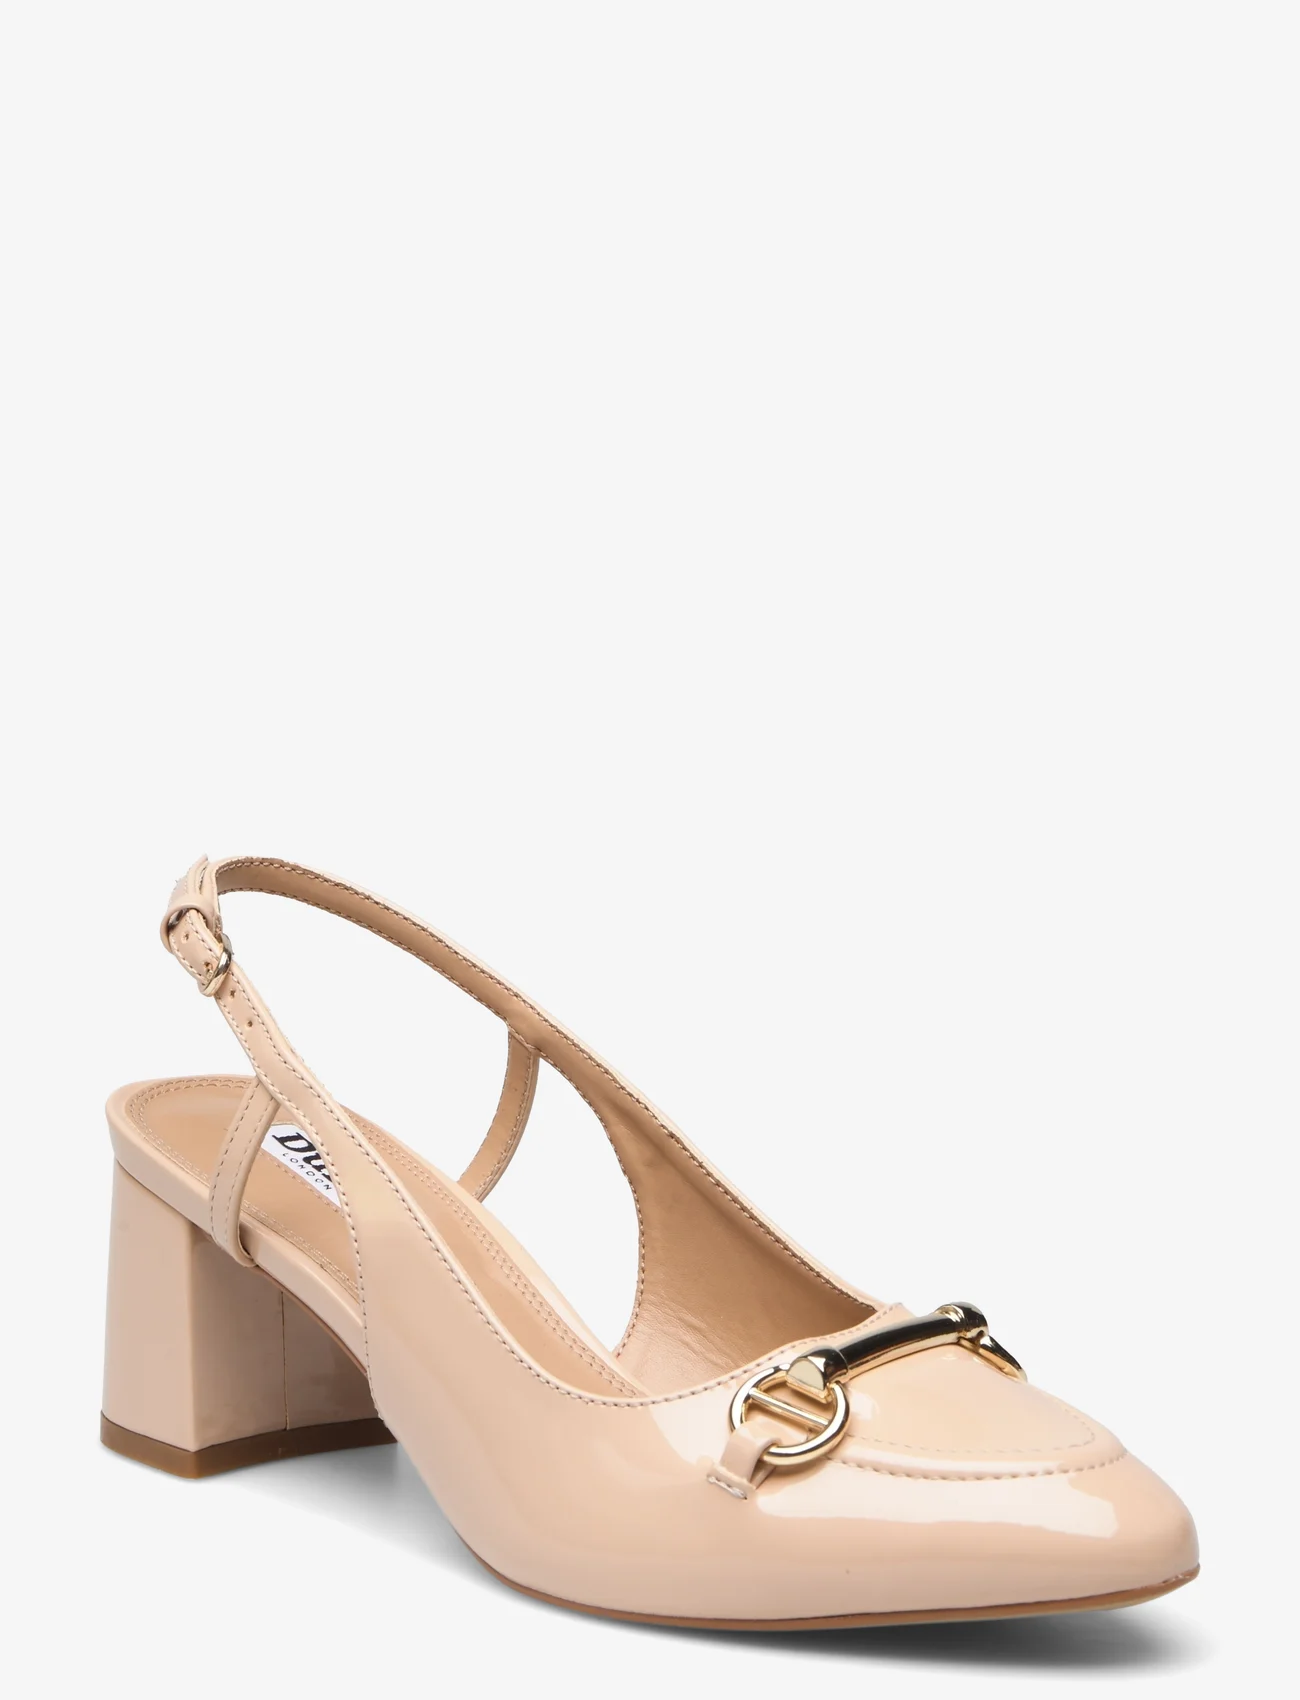 Dune London - cassie - party wear at outlet prices - nude - 0